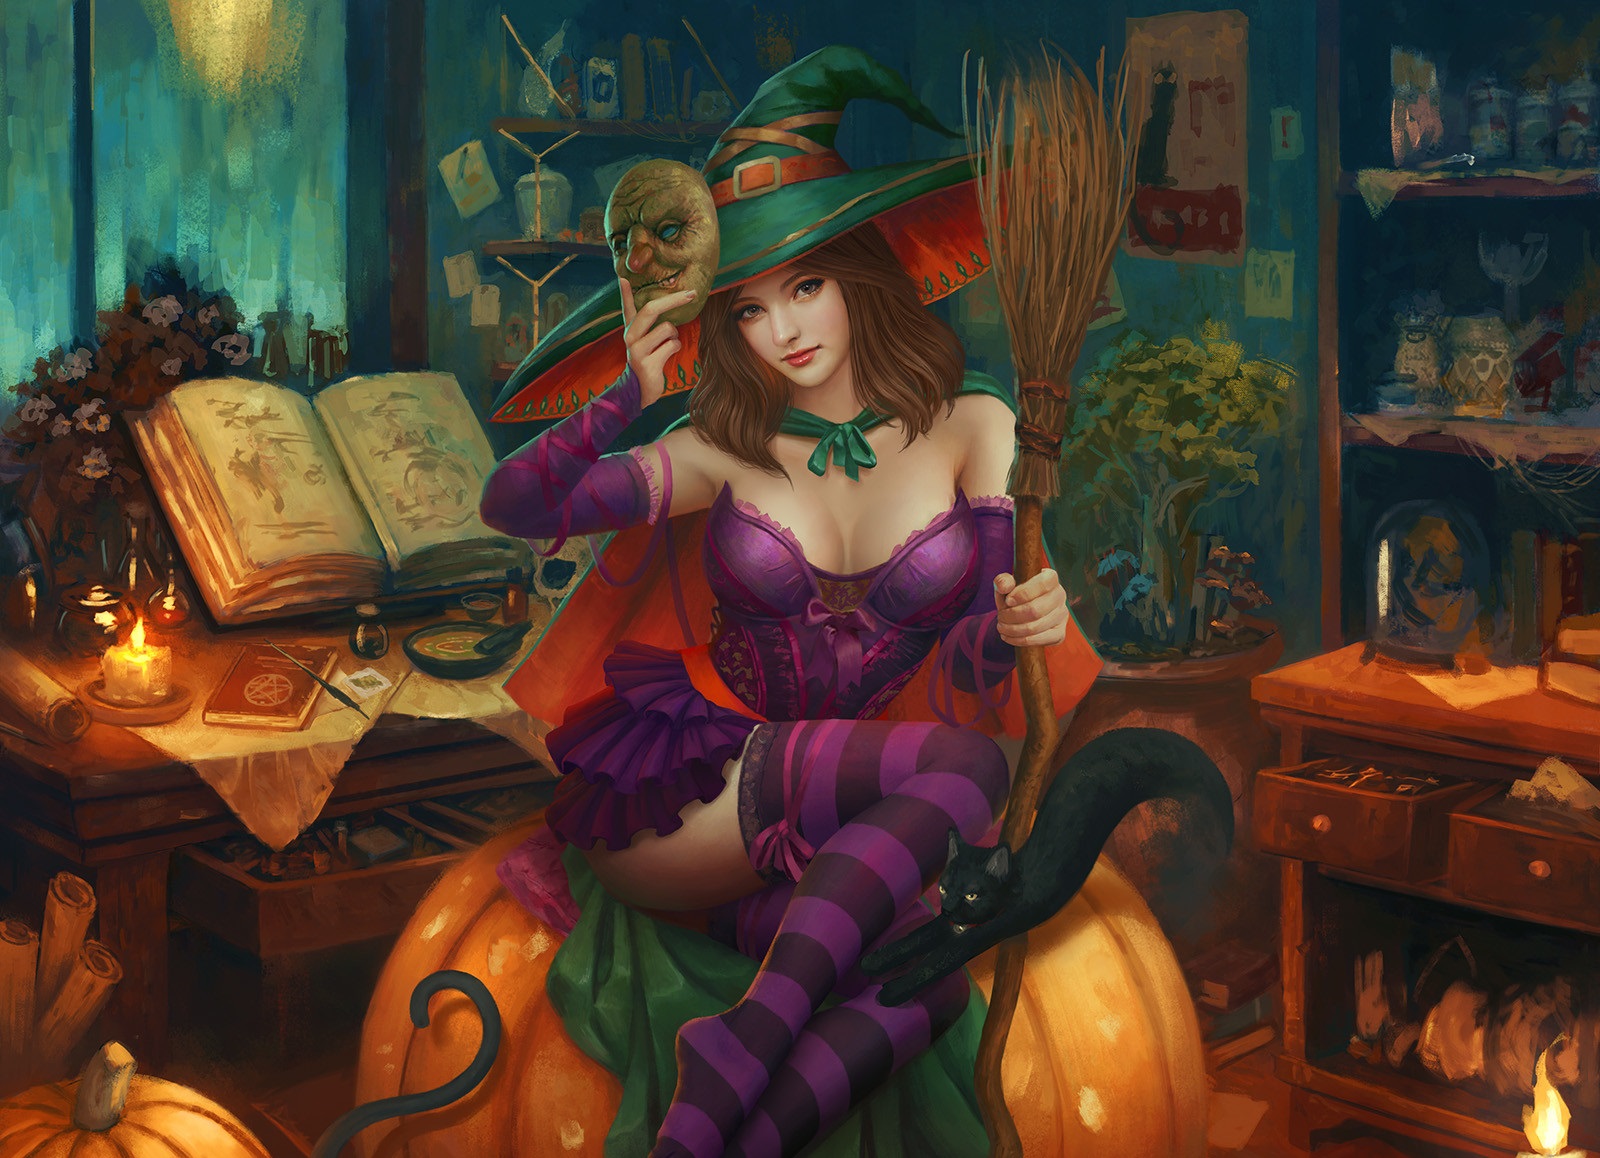 General 1600x1158 digital art women redhead witch mask broom fantasy art artwork painting Mario Wibisono Halloween cleavage cats looking at viewer illustration fan art purple dresses pumpkin colorful costumes stockings purple stockings corset